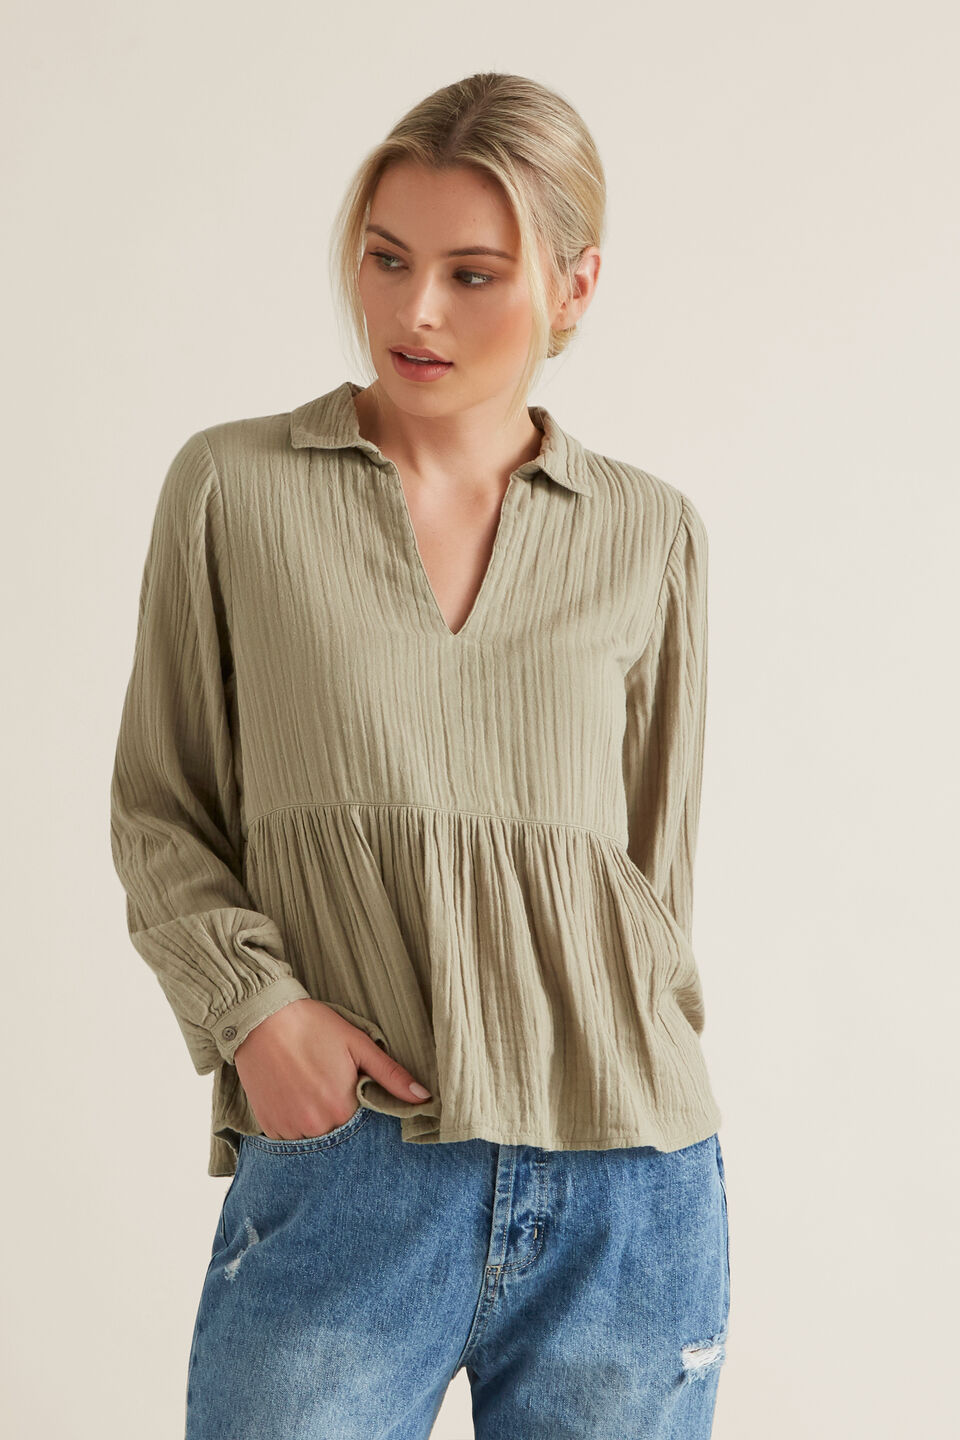 Textured Flowy Blouse  